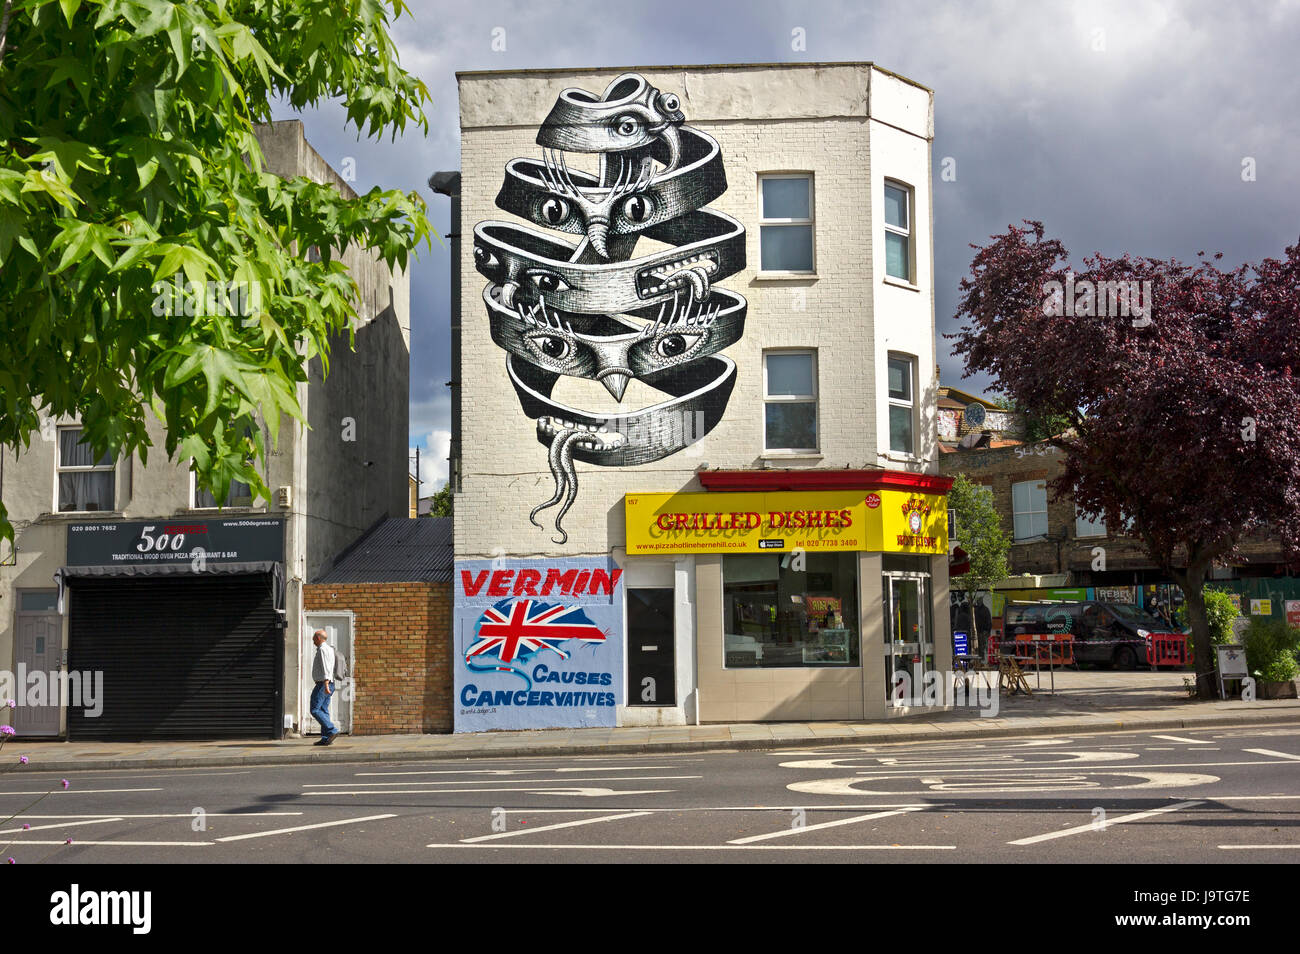 'VERMIN Causes Cancervatives' New political mural by street artist Artful Dodger on a wall in Herne Hill, SE London. Above it a fantastical mural inspired by M. C. Escher by London-based muralist and street artist, Phlegm. Stock Photo